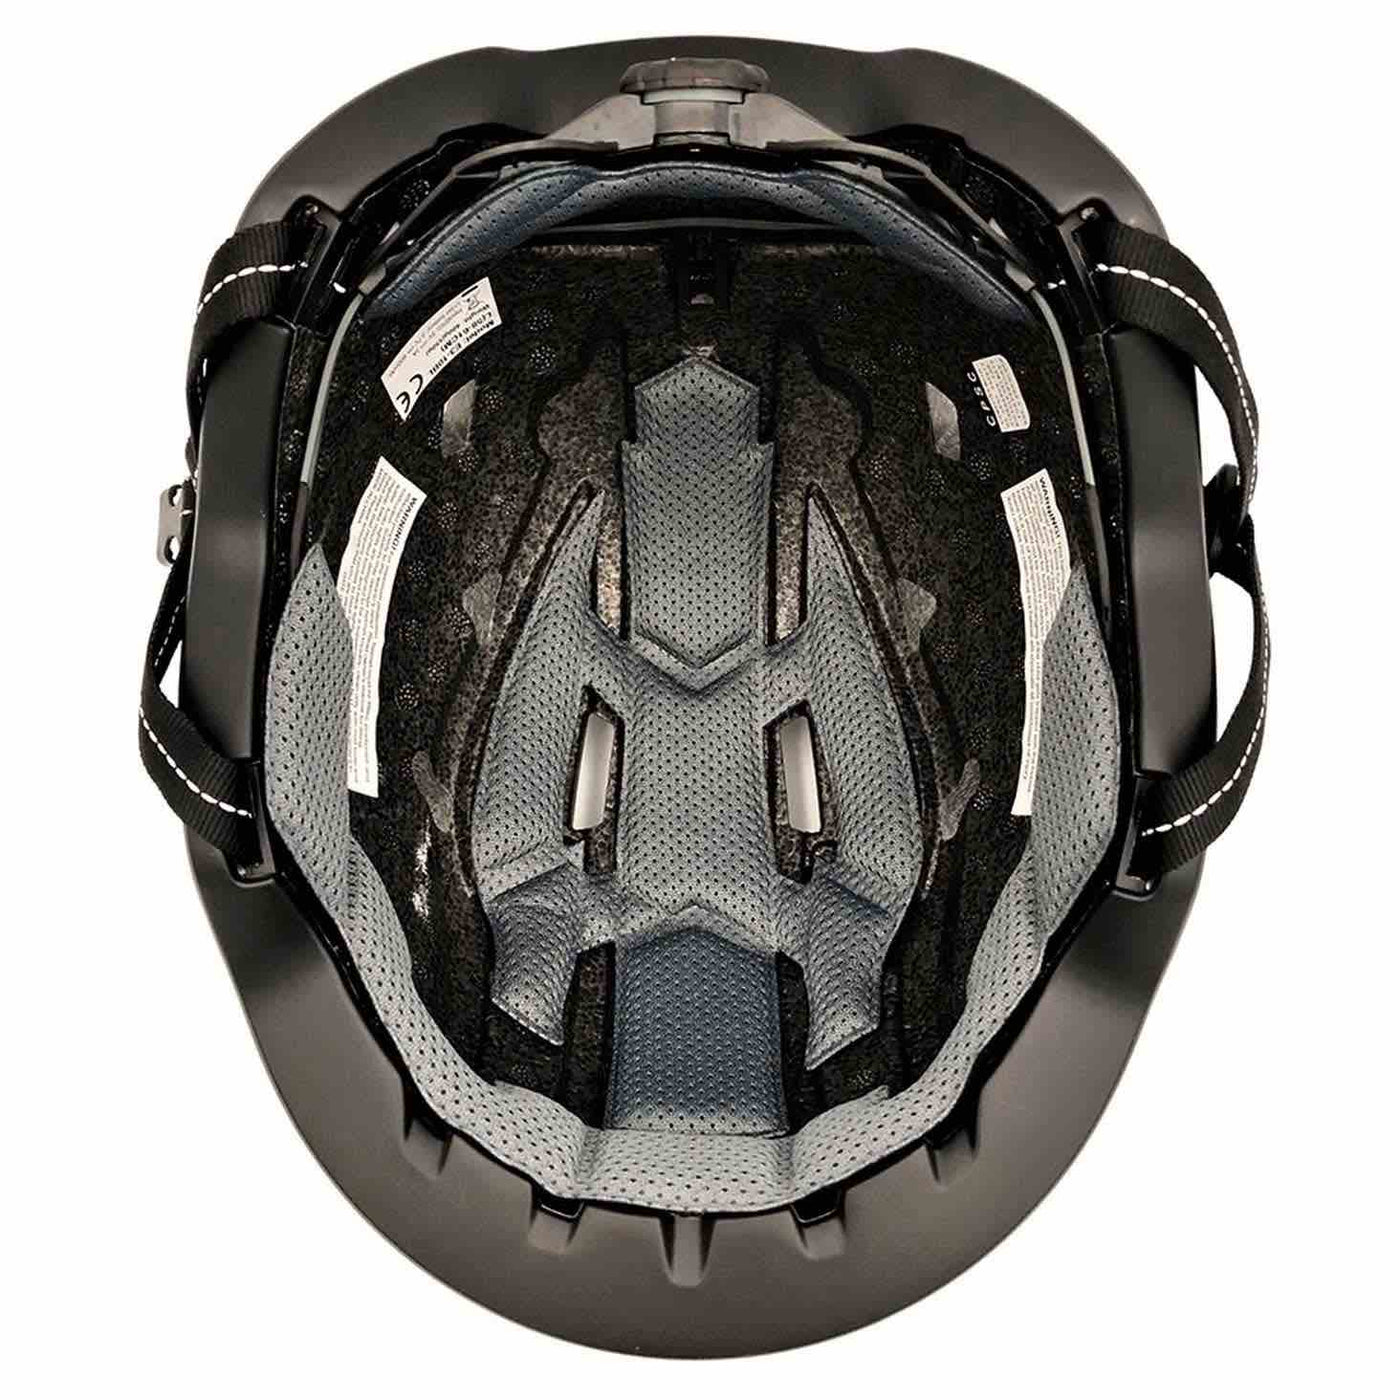 xnito helmet inside view showing adjustability